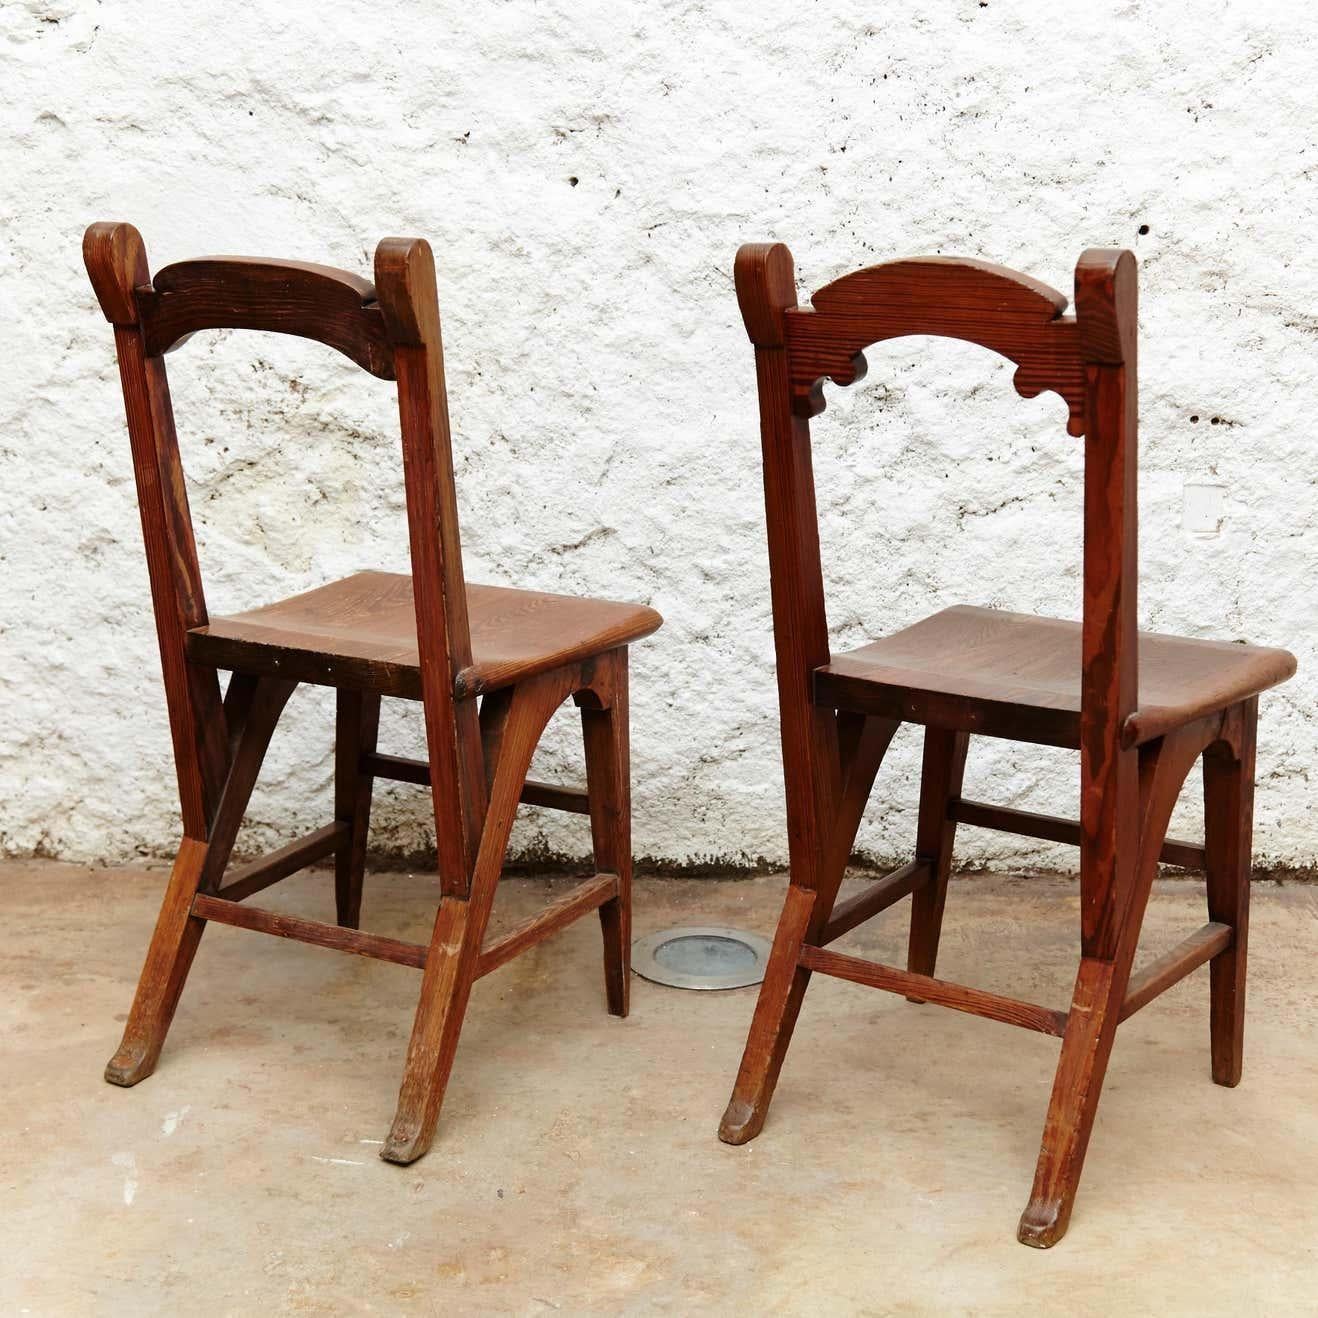 Arts and Crafts Pair of Catalan Modernist Wooden Chairs, circa 1920 For Sale